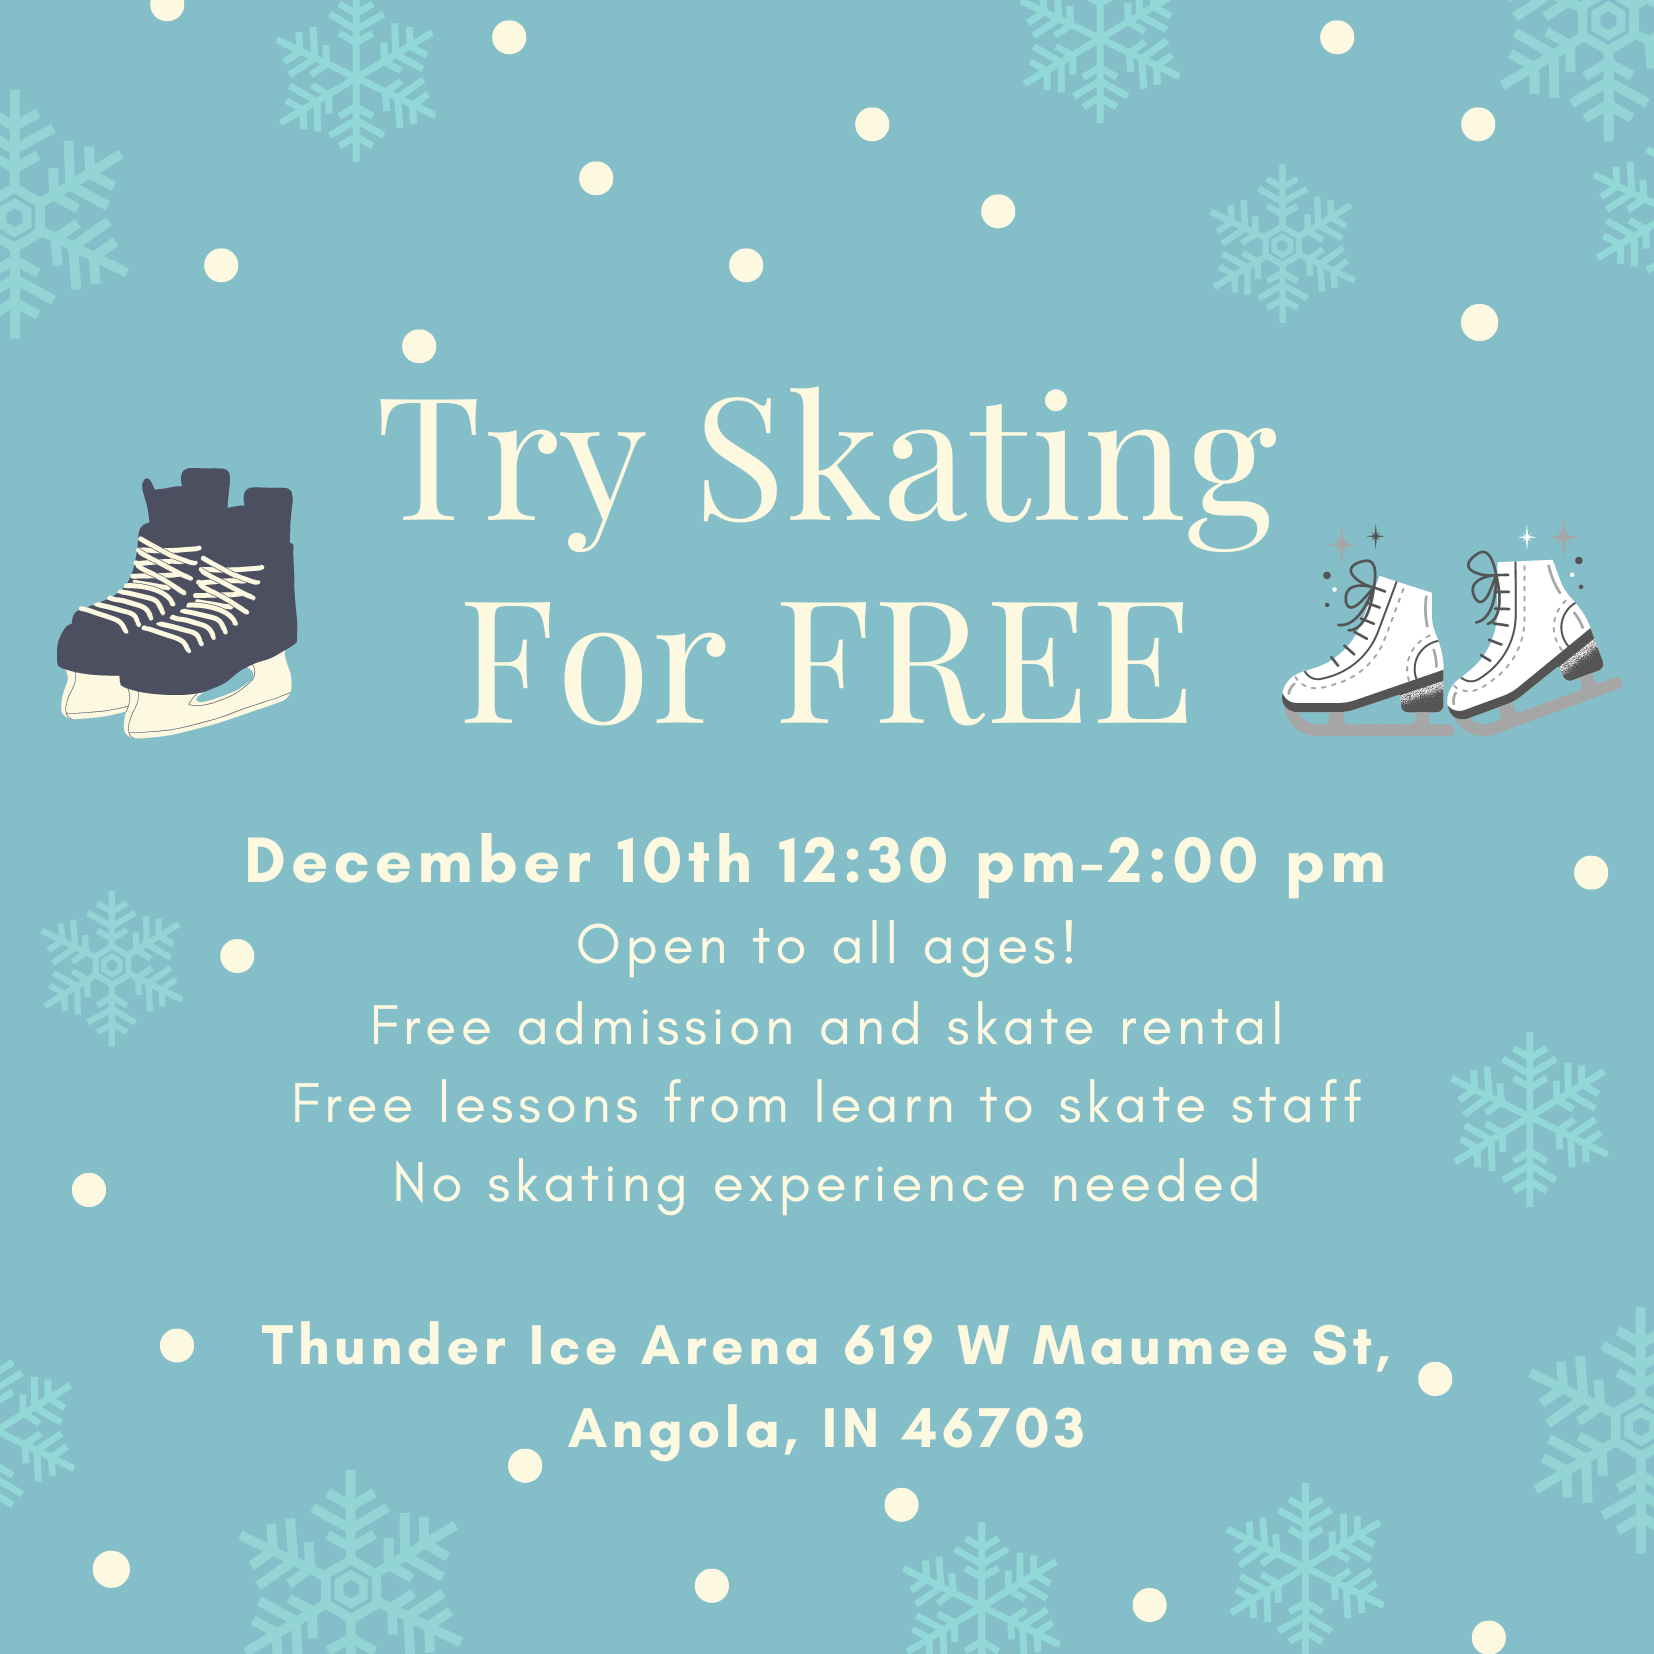 skating for free info